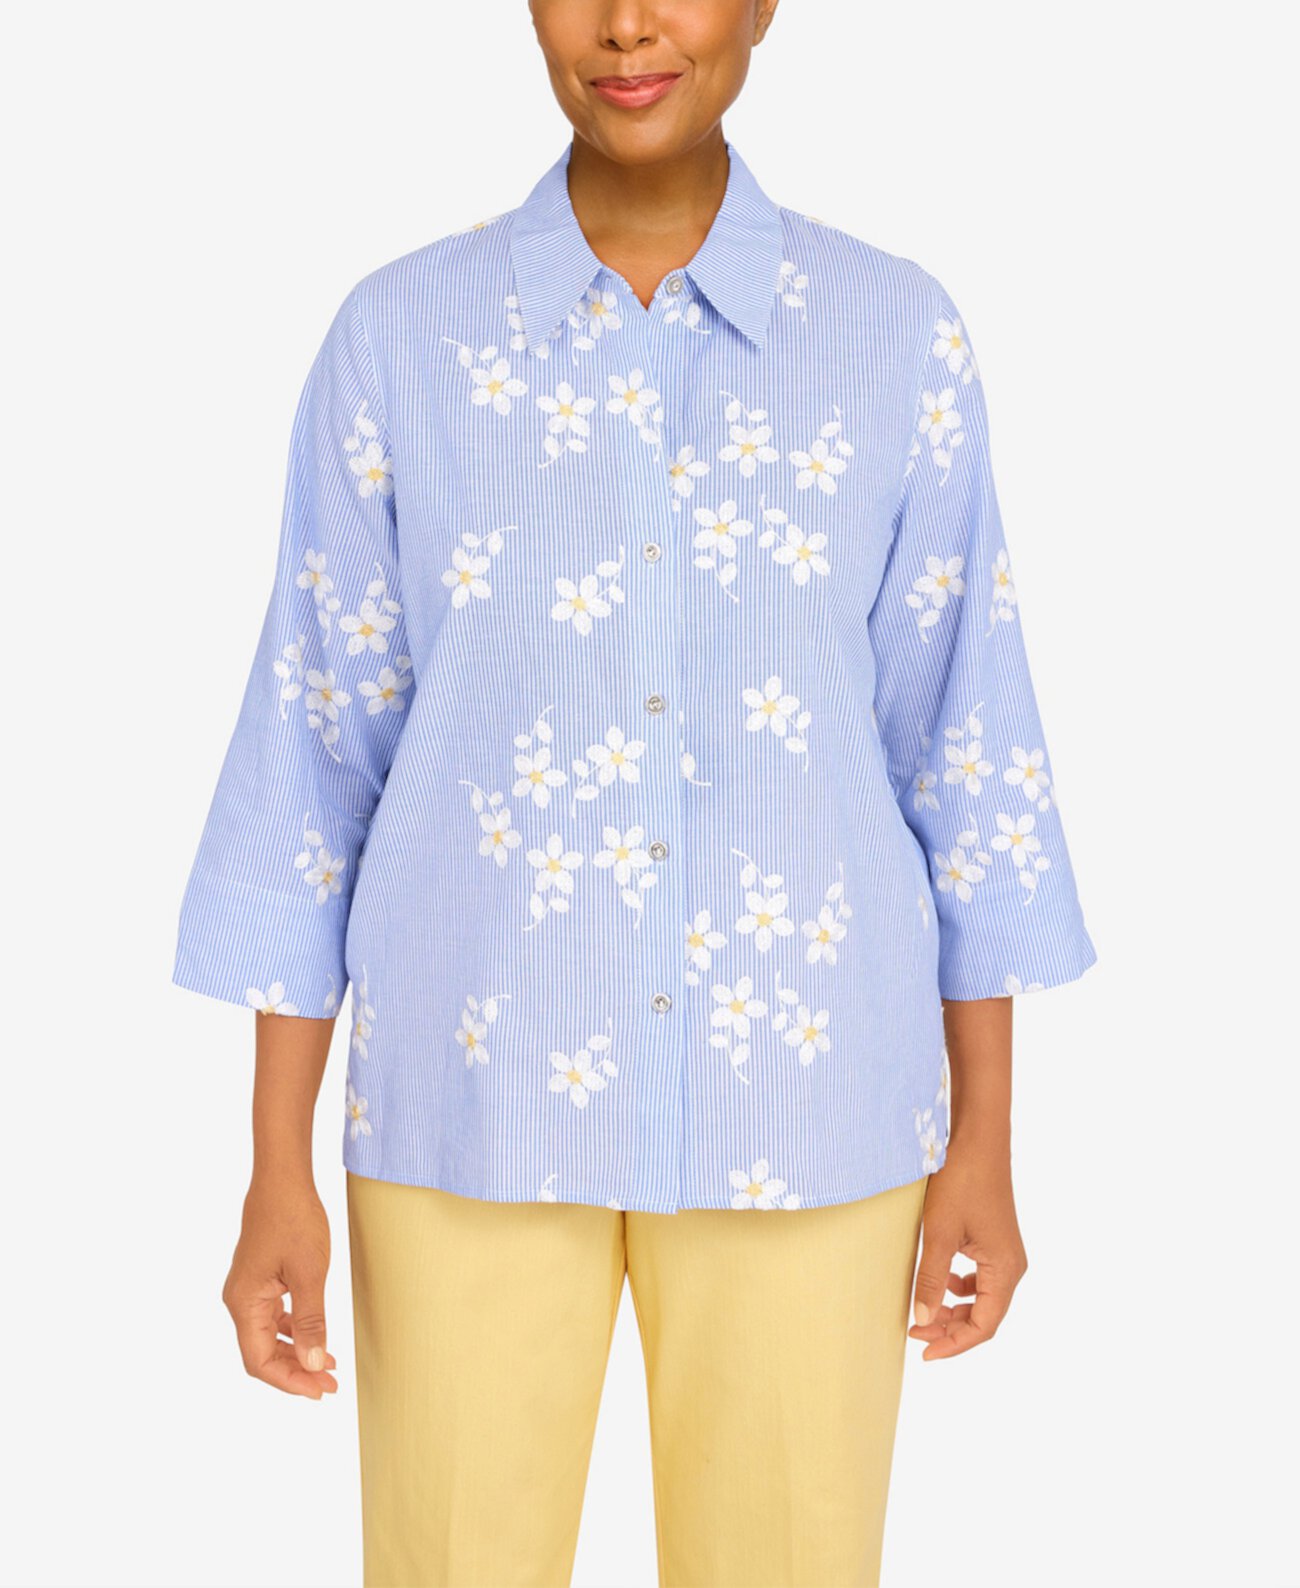 Women's Bright Idea Pinstripe Floral Button Down Top Alfred Dunner